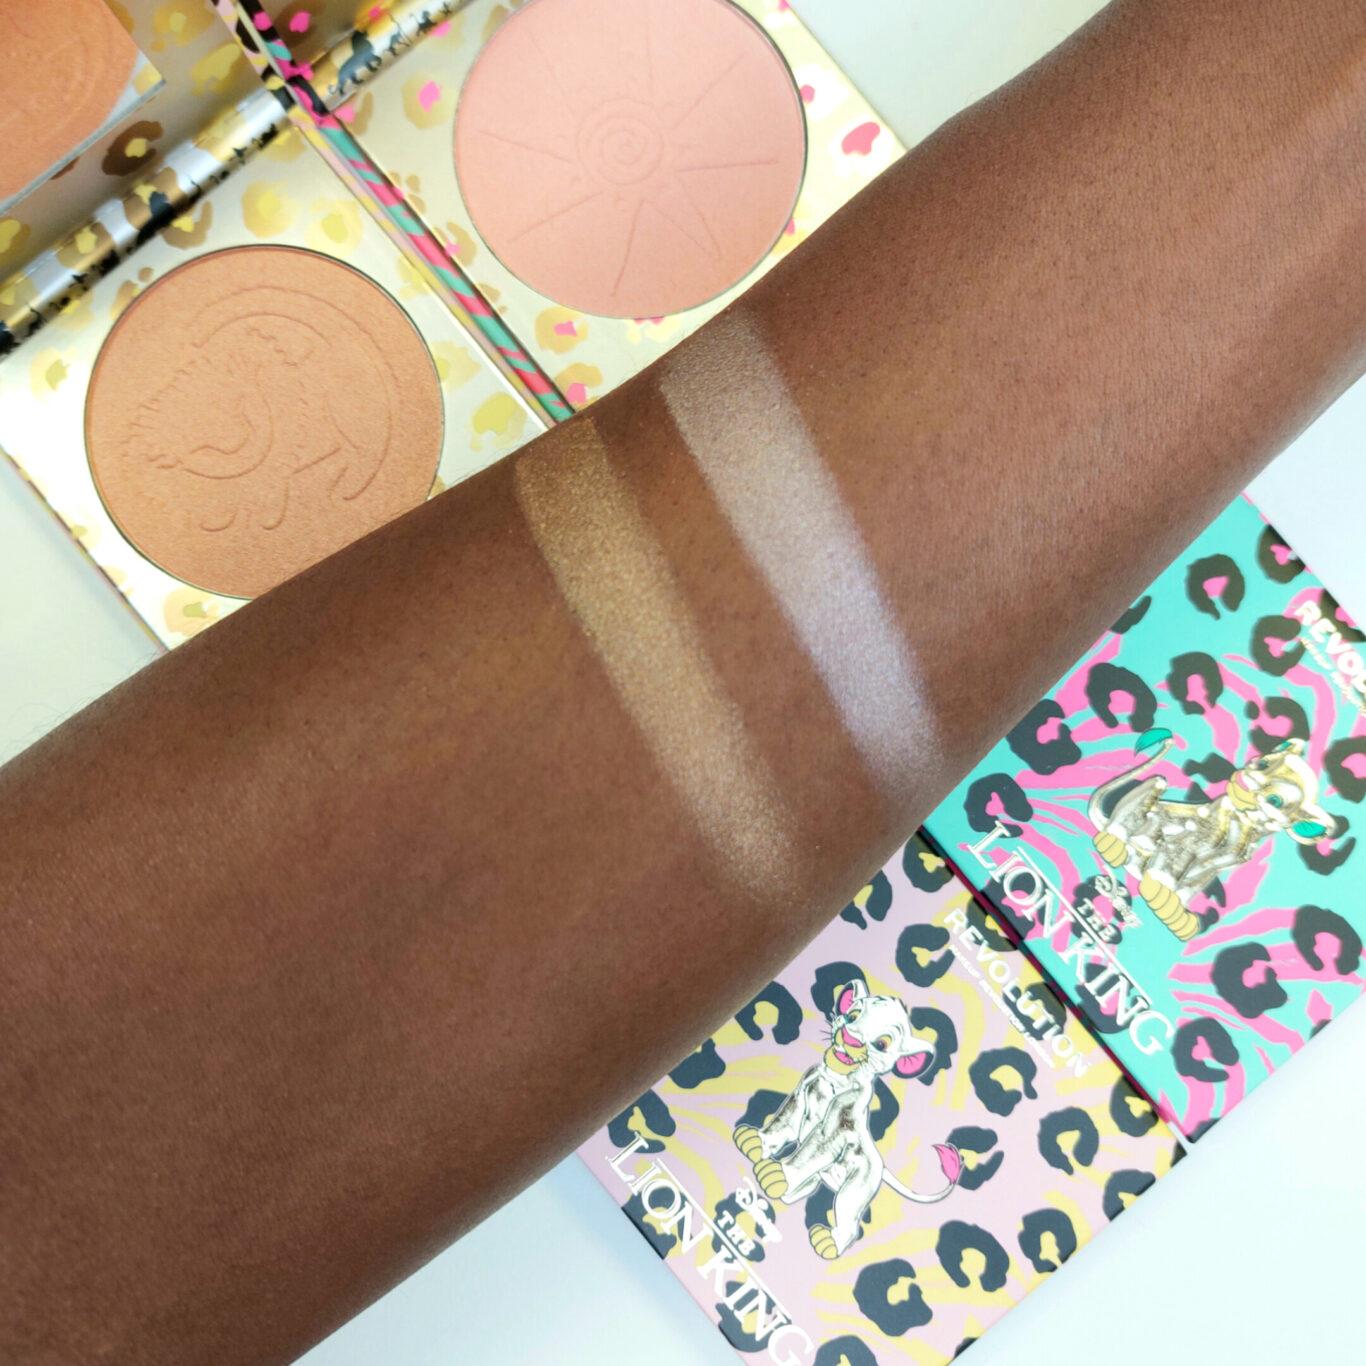 Revolution Disney's The Lion King Collection Highlighter Arm Swatches Deep